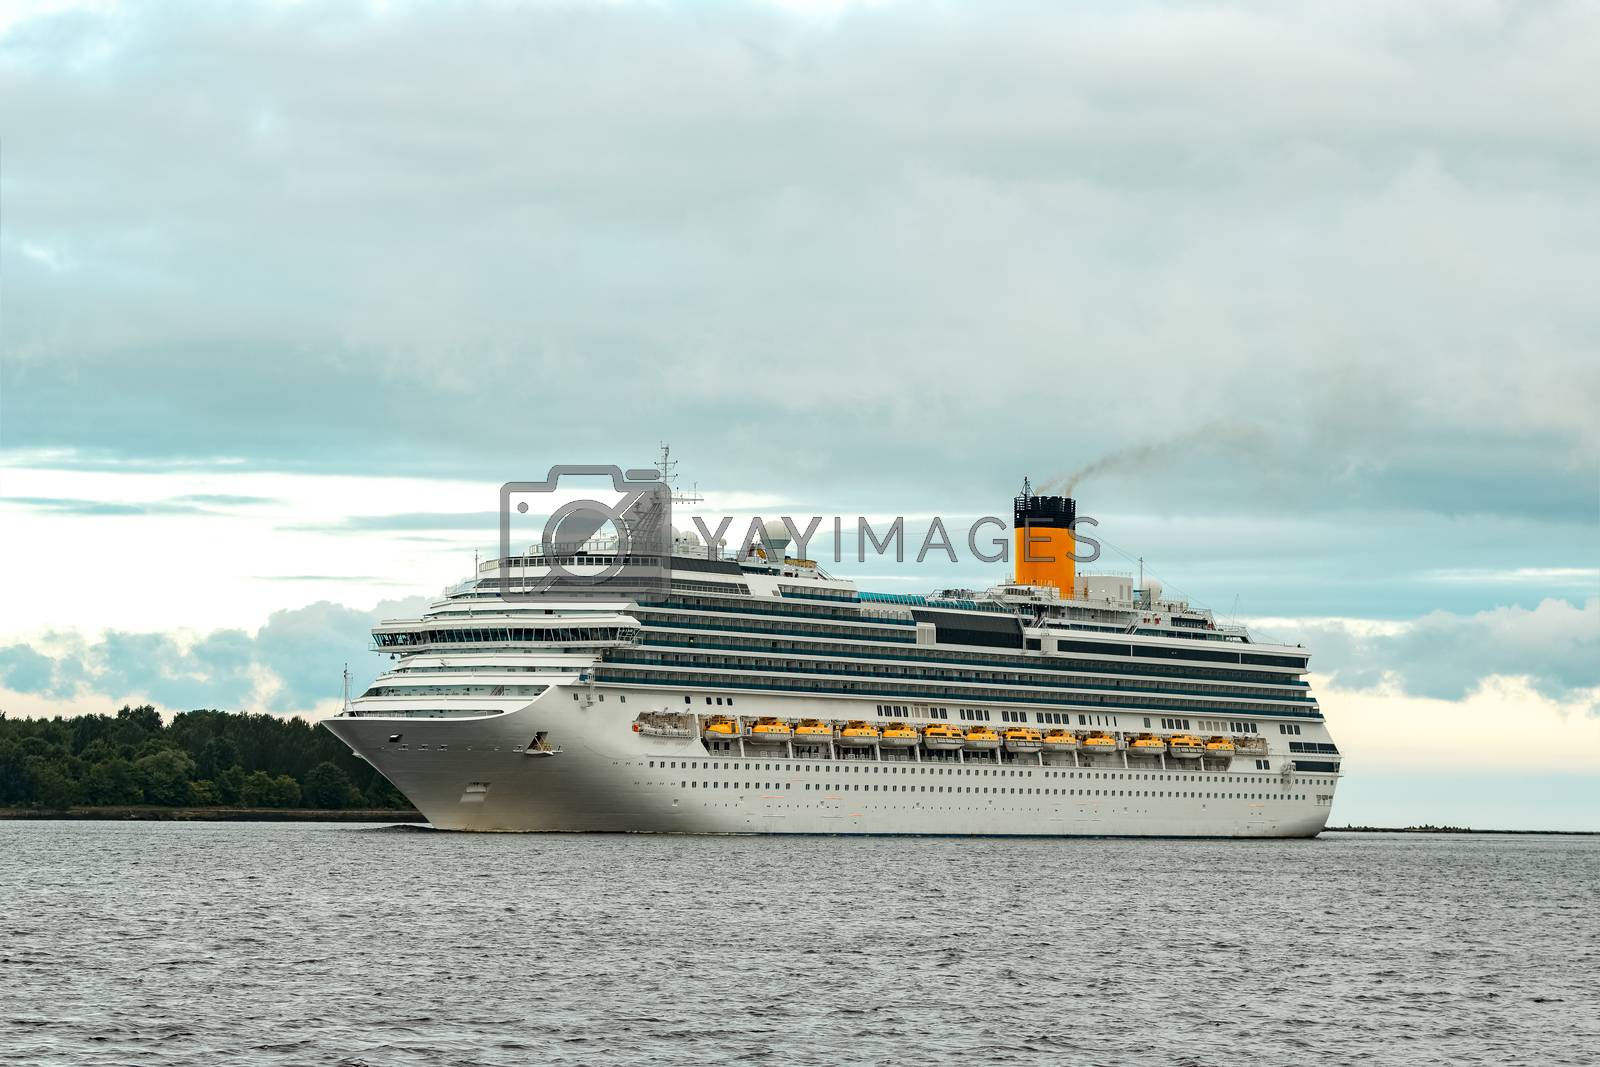 Royalty free image of Large royal cruise liner by sengnsp